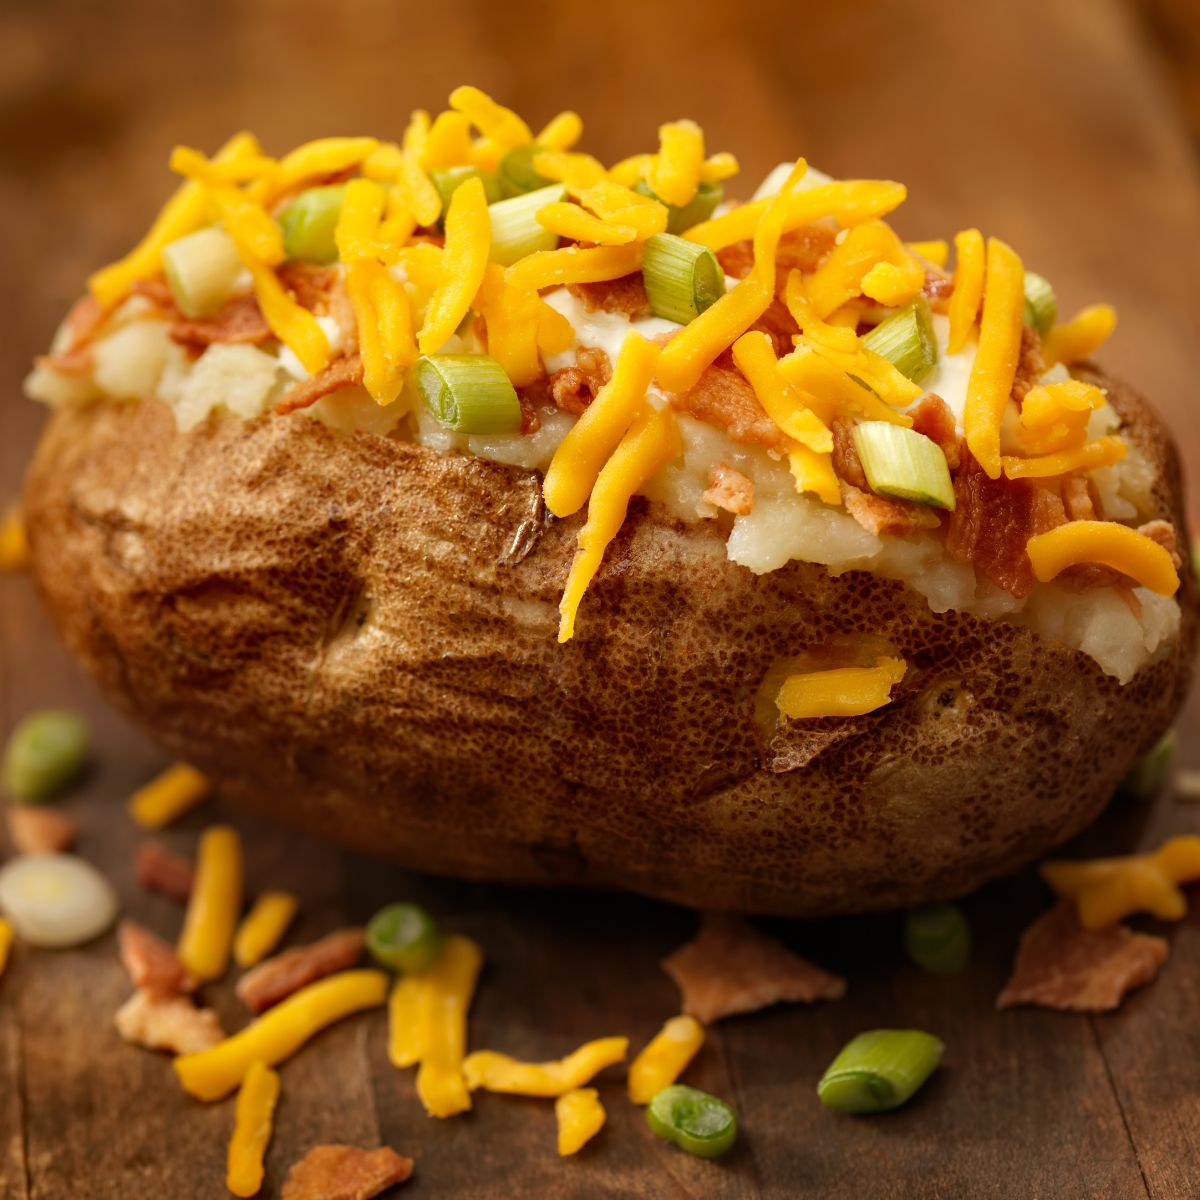 Baked potato topped with bacon and shredded cheddar cheese